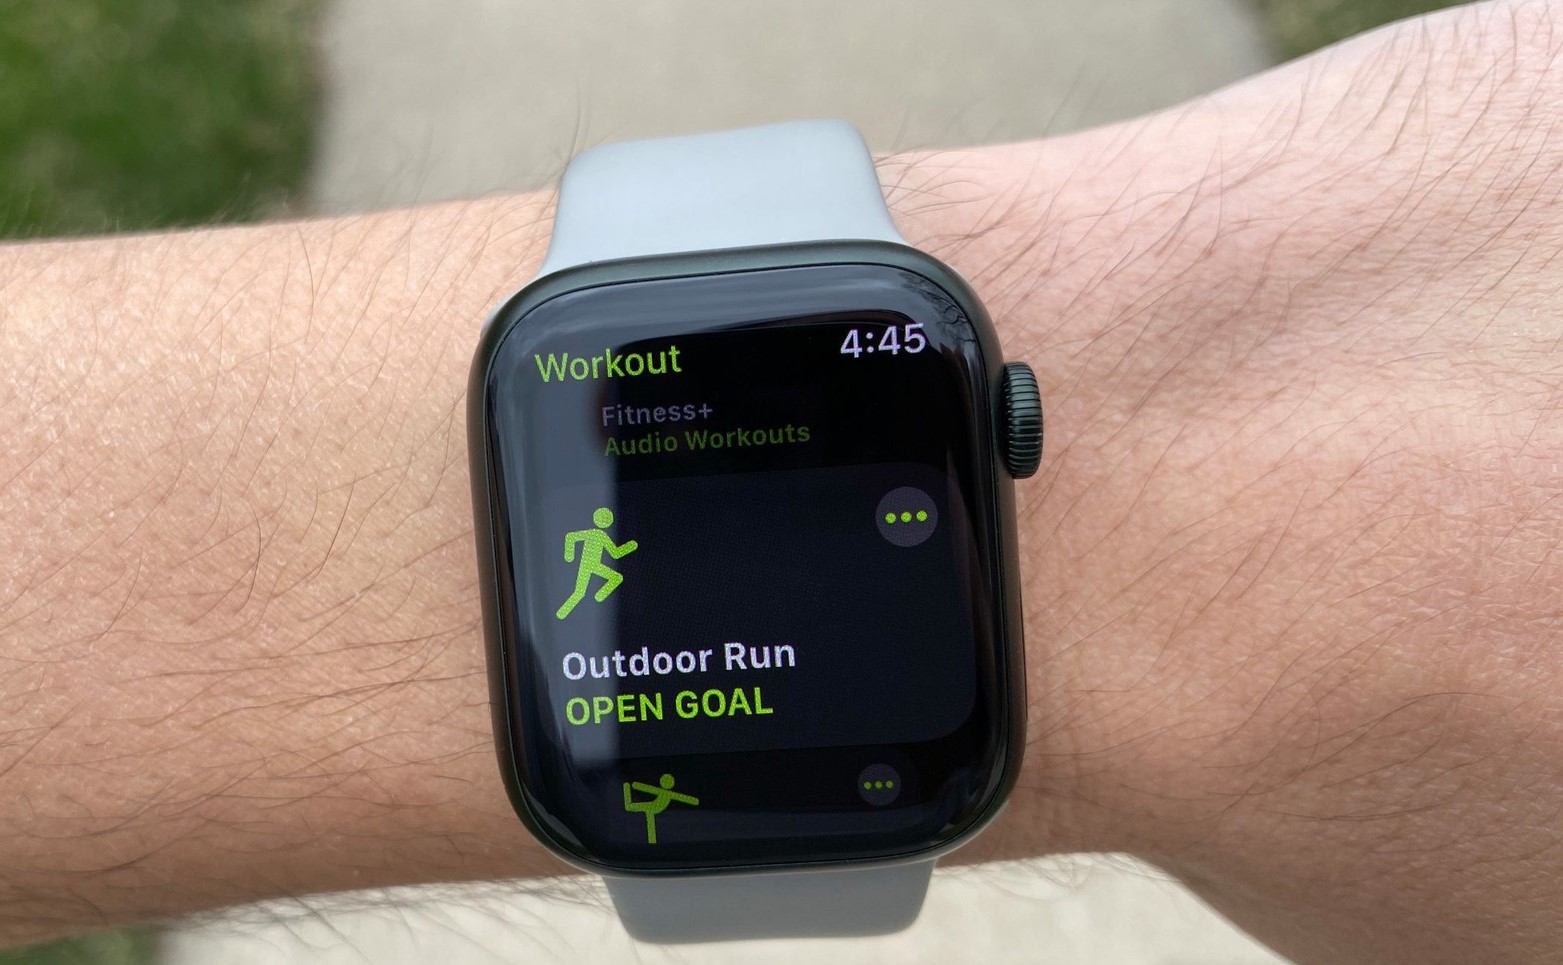 How To Delete A Workout On Apple Watch